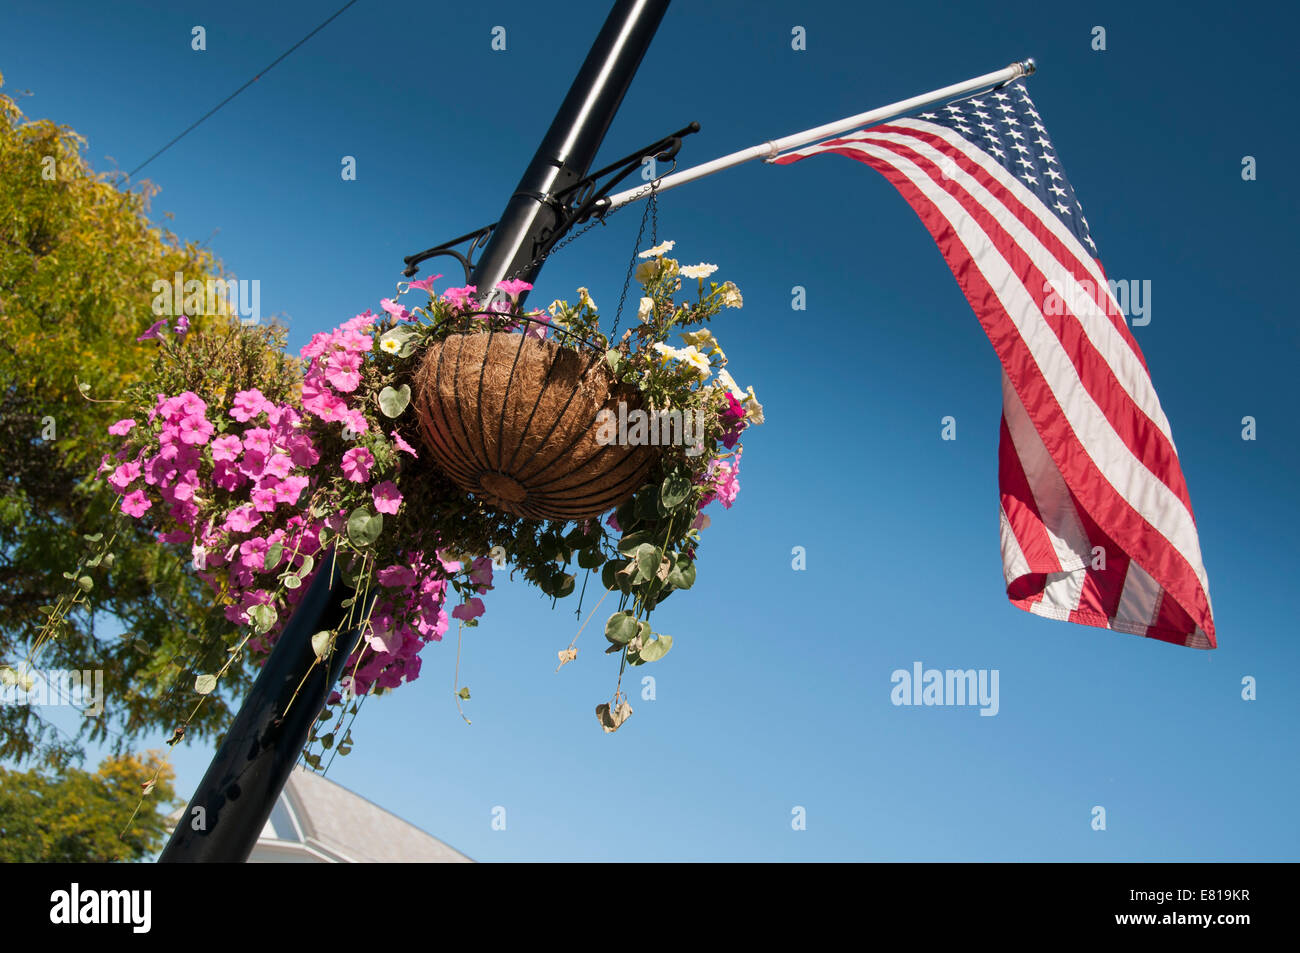 American flag and flower basket. Stock Photo